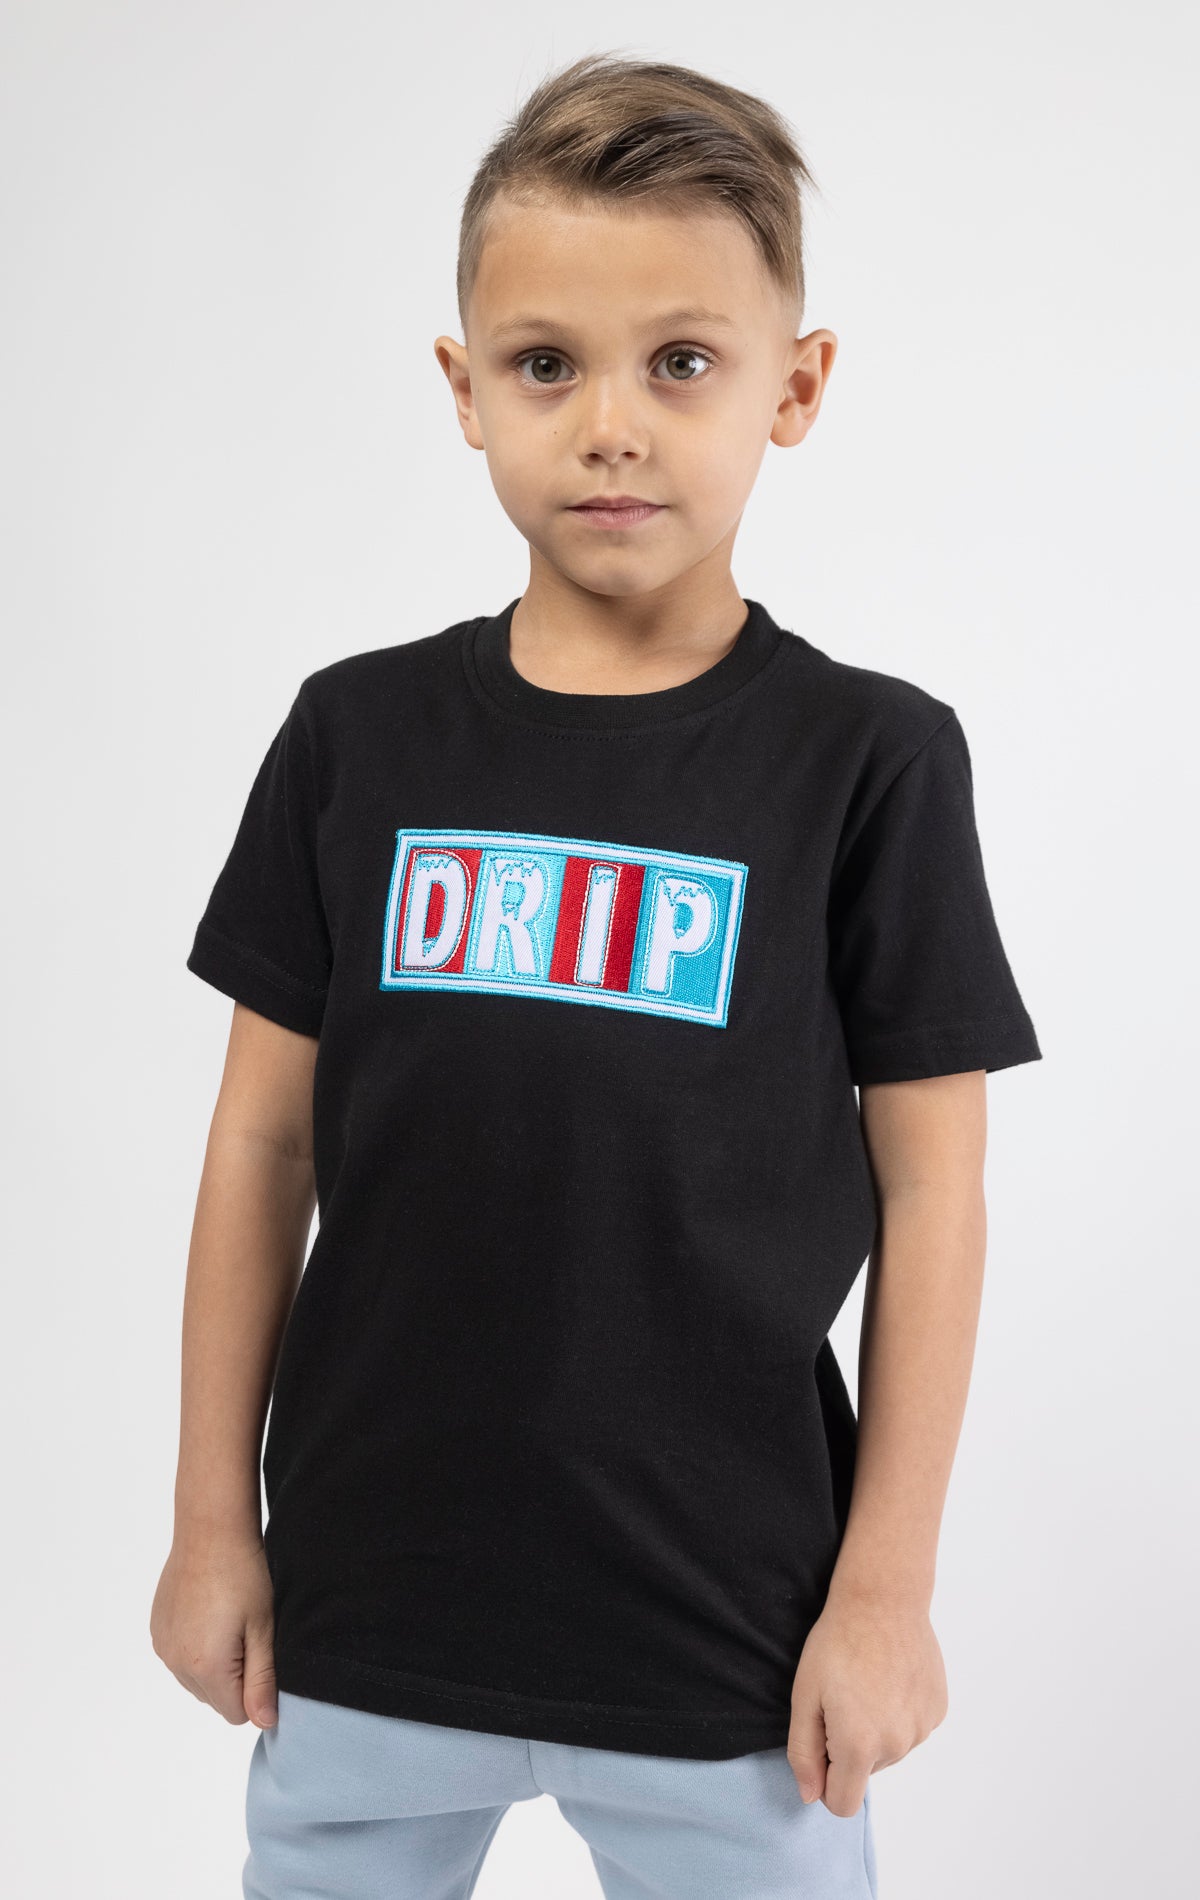 Kids' crew neck t-shirt features a drip patch embroidered on the front and short sleeves. Made of breathable material.